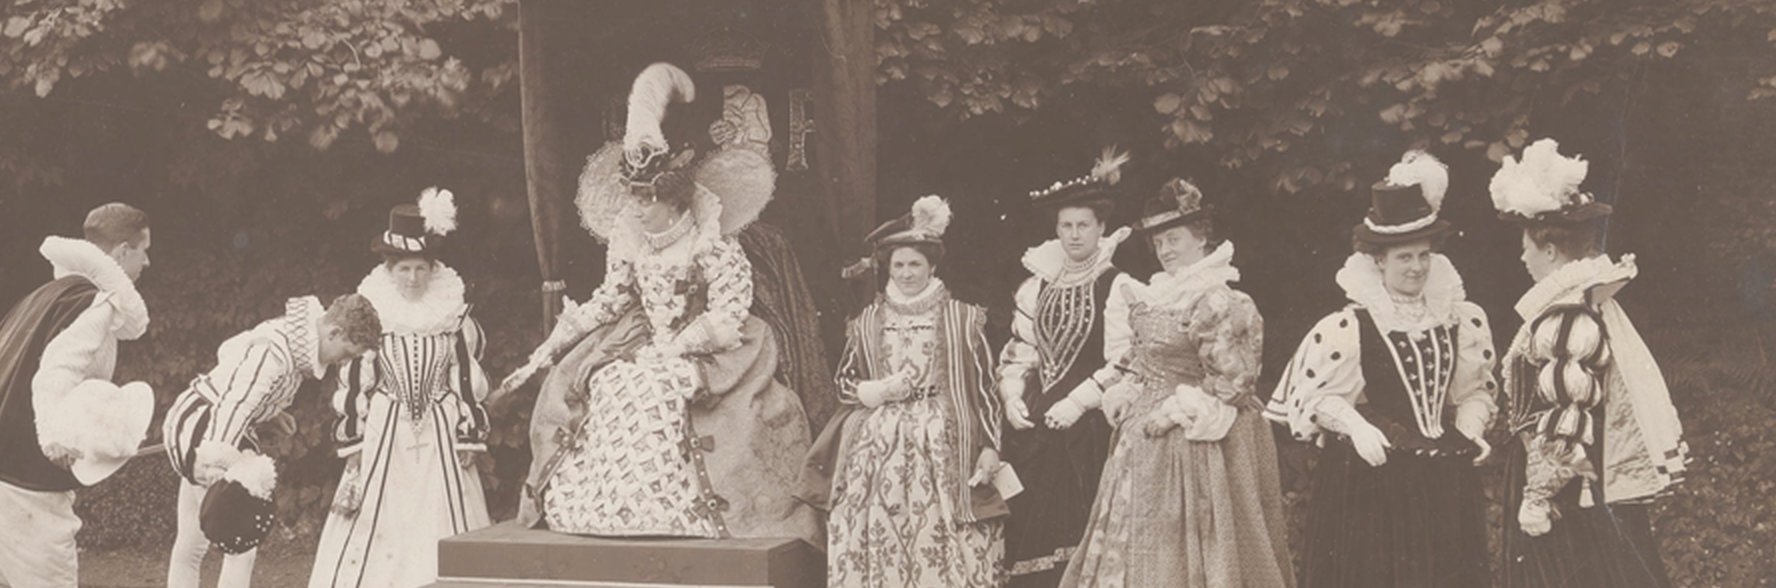 A black and white photo showing a group of women and two men donning period costumes.